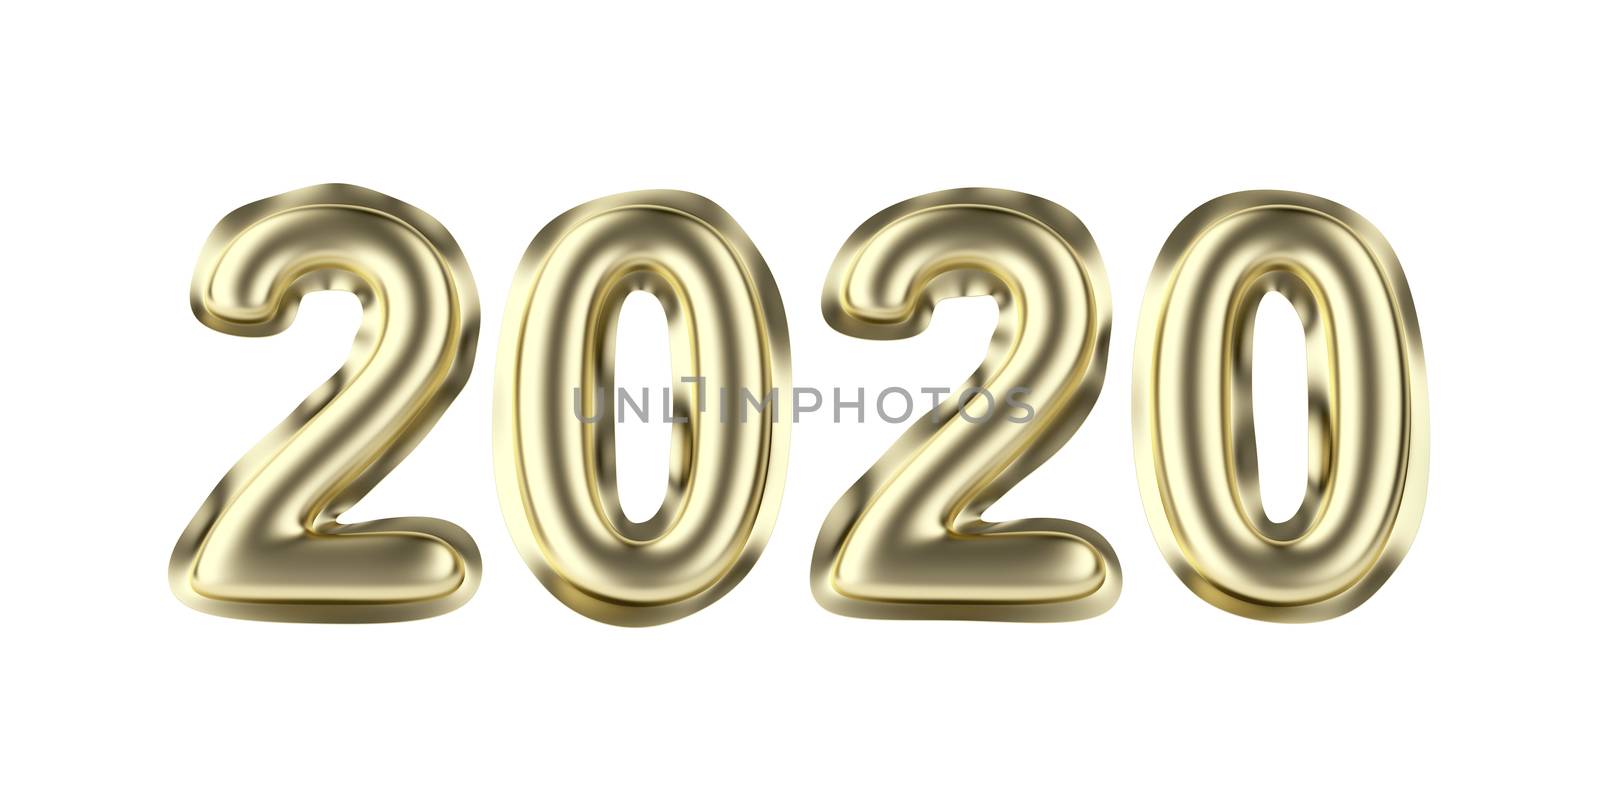 Happy new year 2020 by magraphics